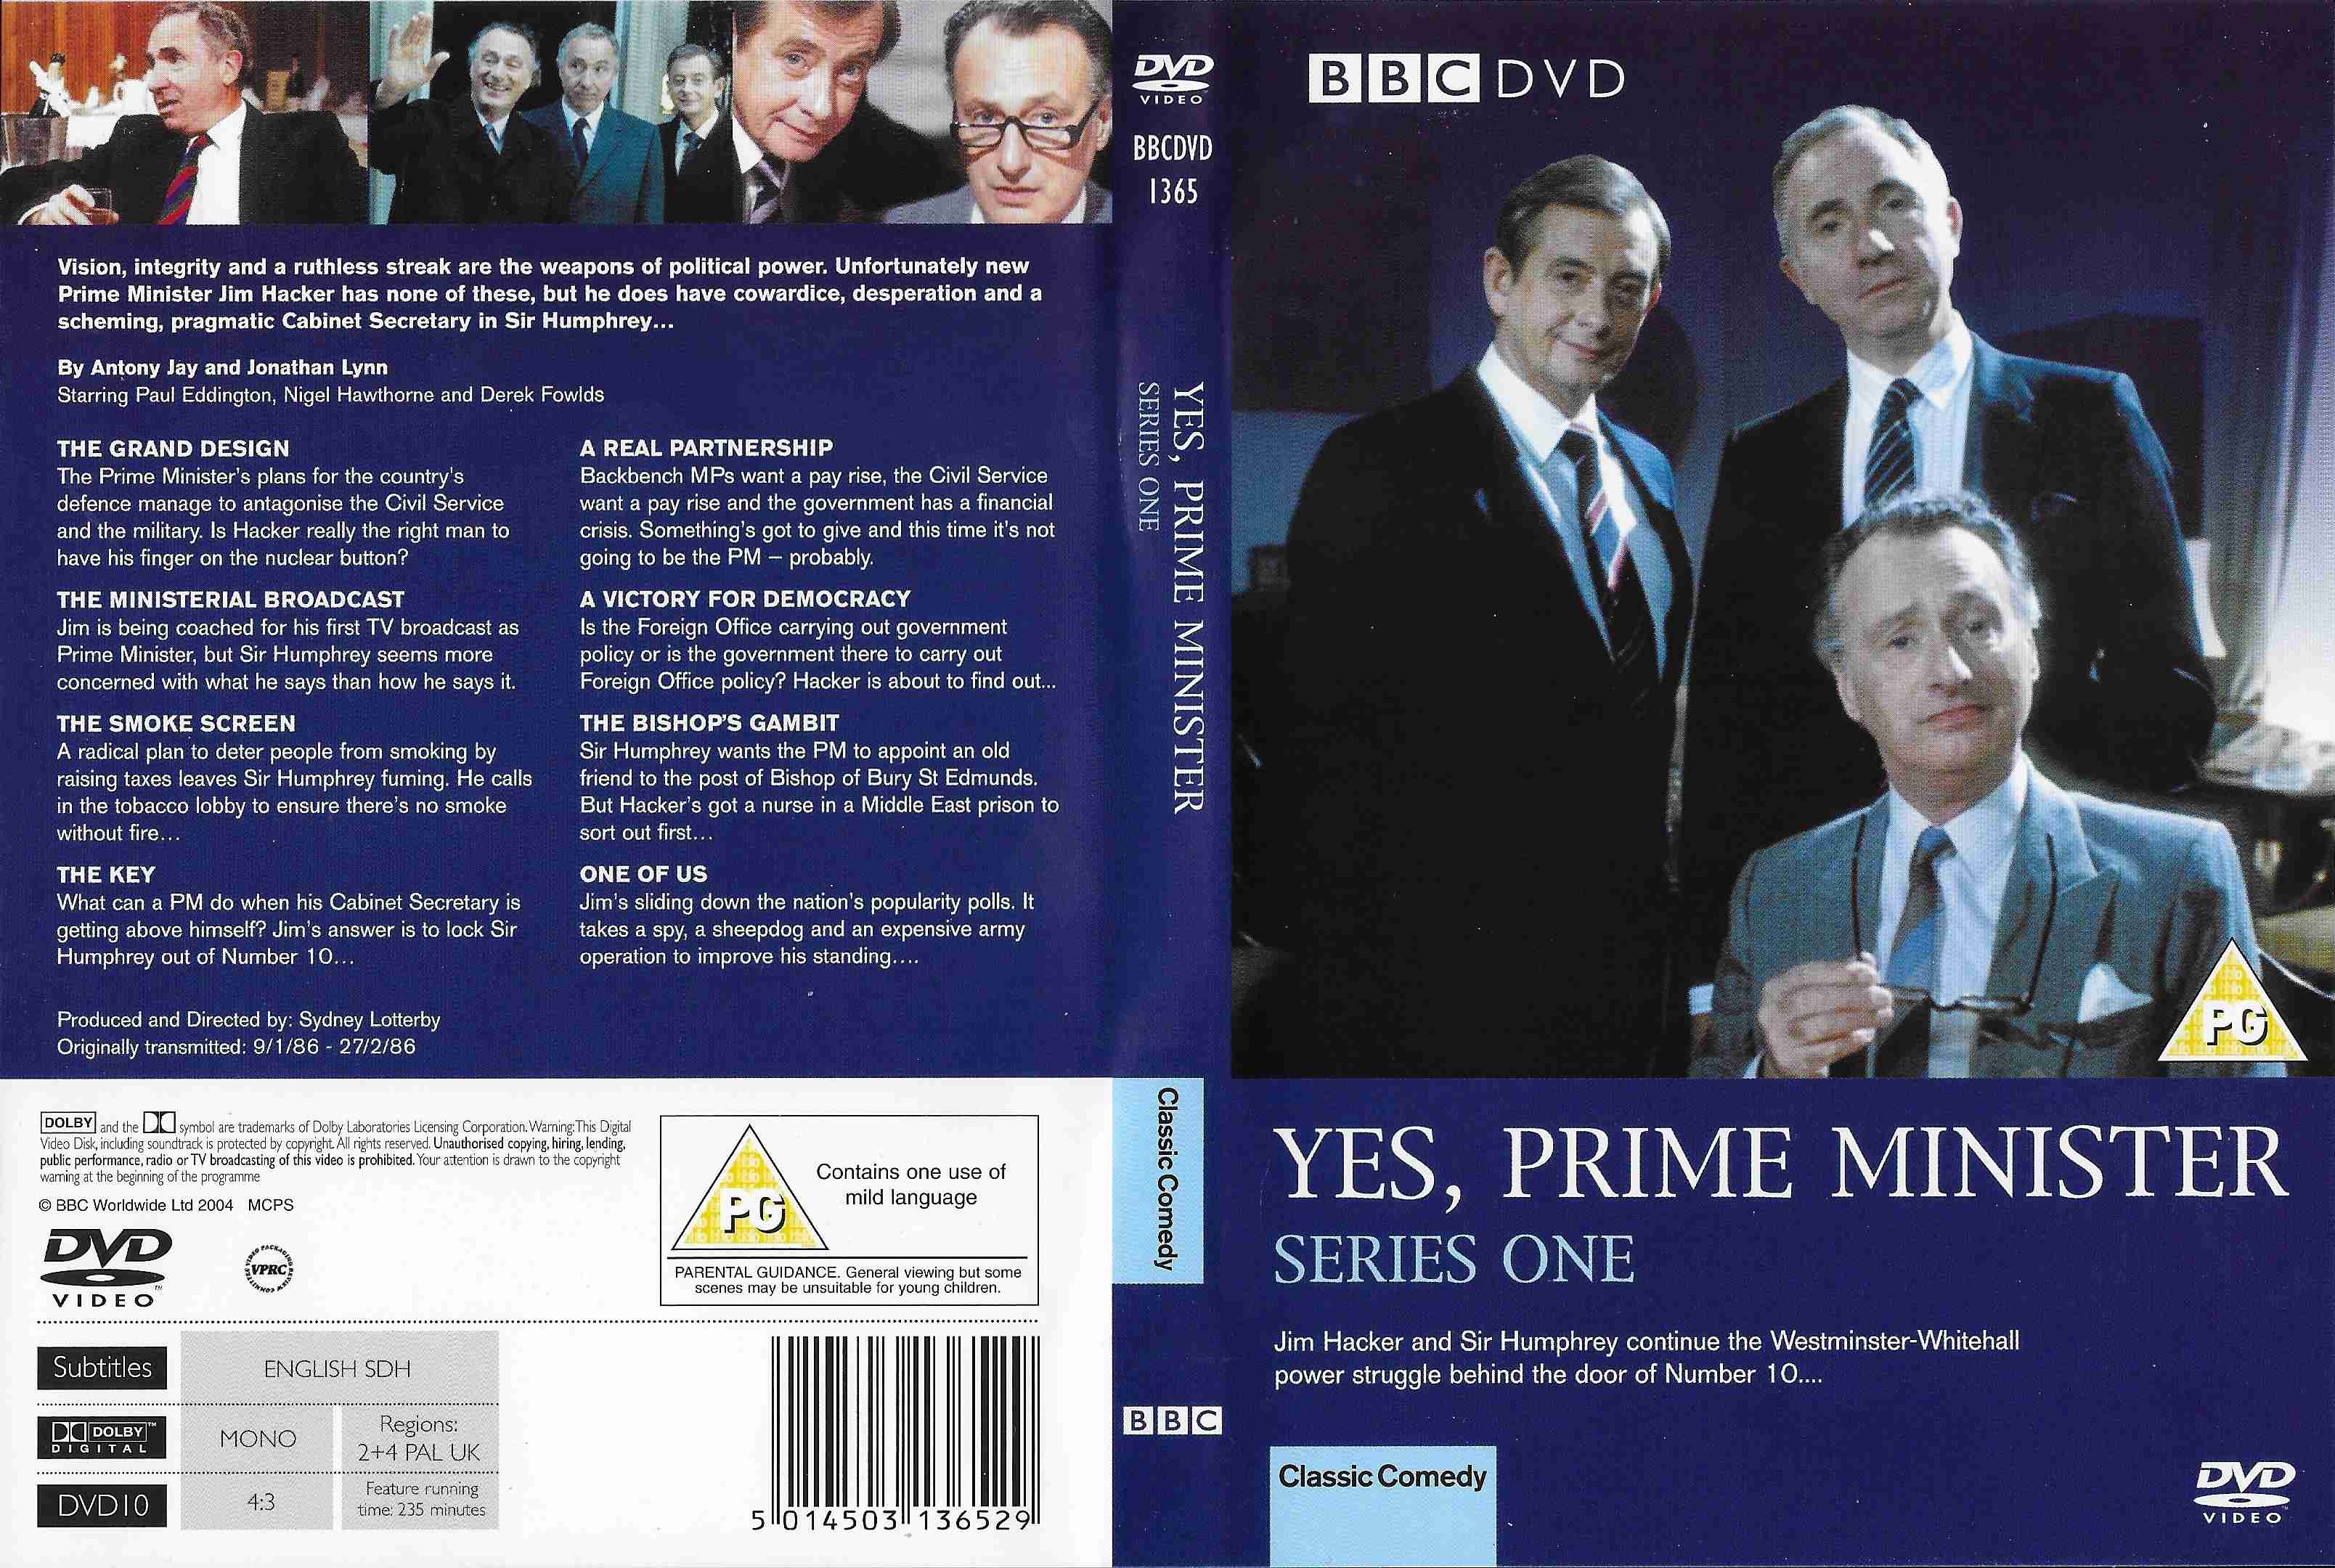 Picture of BBCDVD 1365 Yes, Prime Minister - Series One by artist Antony Jay / Jonathan Lynn from the BBC records and Tapes library